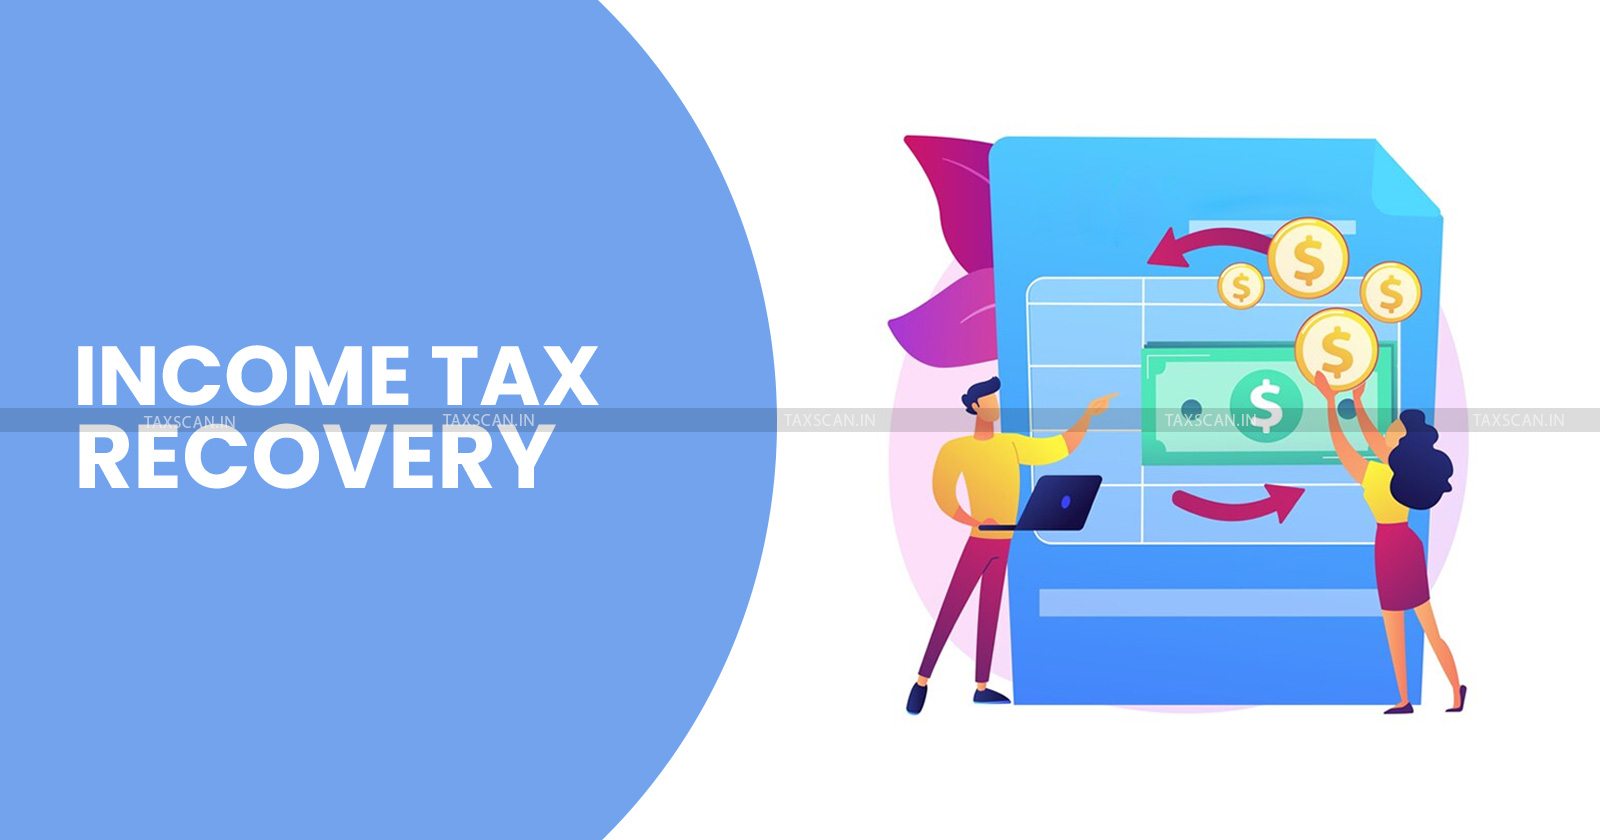 Kerala High Court - Income Tax - Income Tax Recovery - Disposal of Stay Petition - TAXSCAN